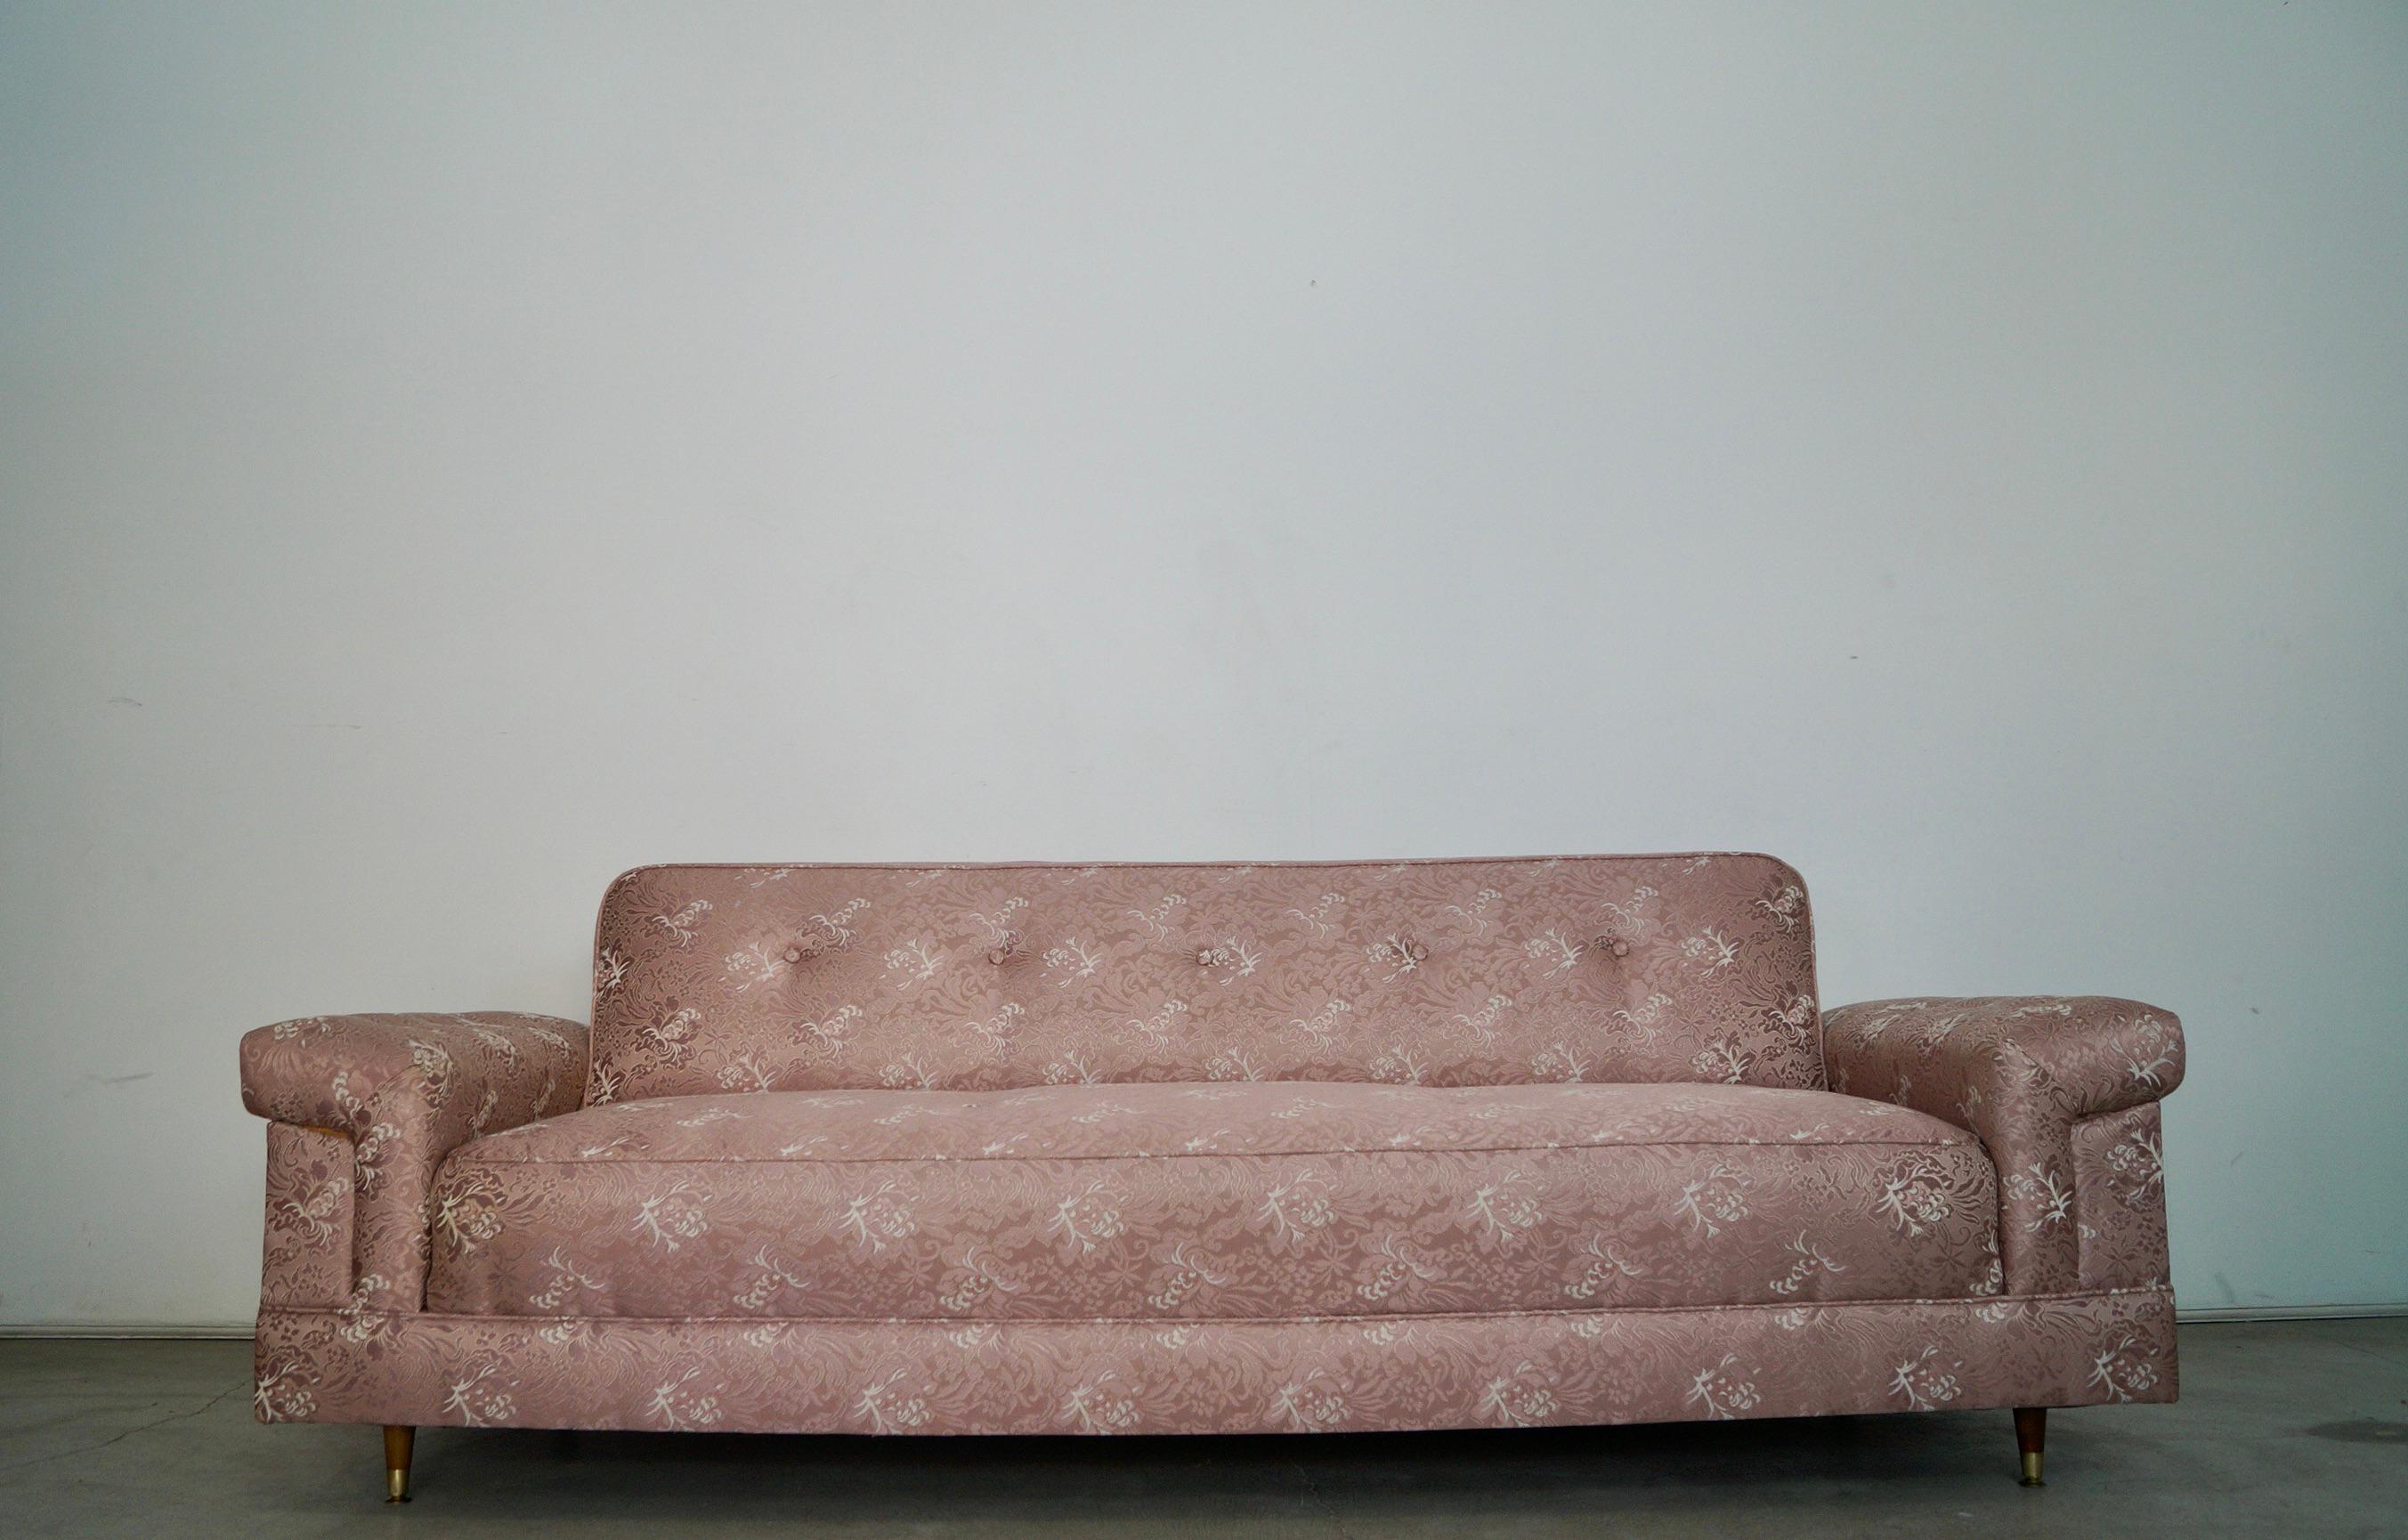 Vintage 1950's Midcentury Modern foldable sofa / daybed for sale. Originally from the 1950's, and was professionally reupholstered in the 1960's. The owners had it covered with a plastic sofa cover after all these years so the upholstery is